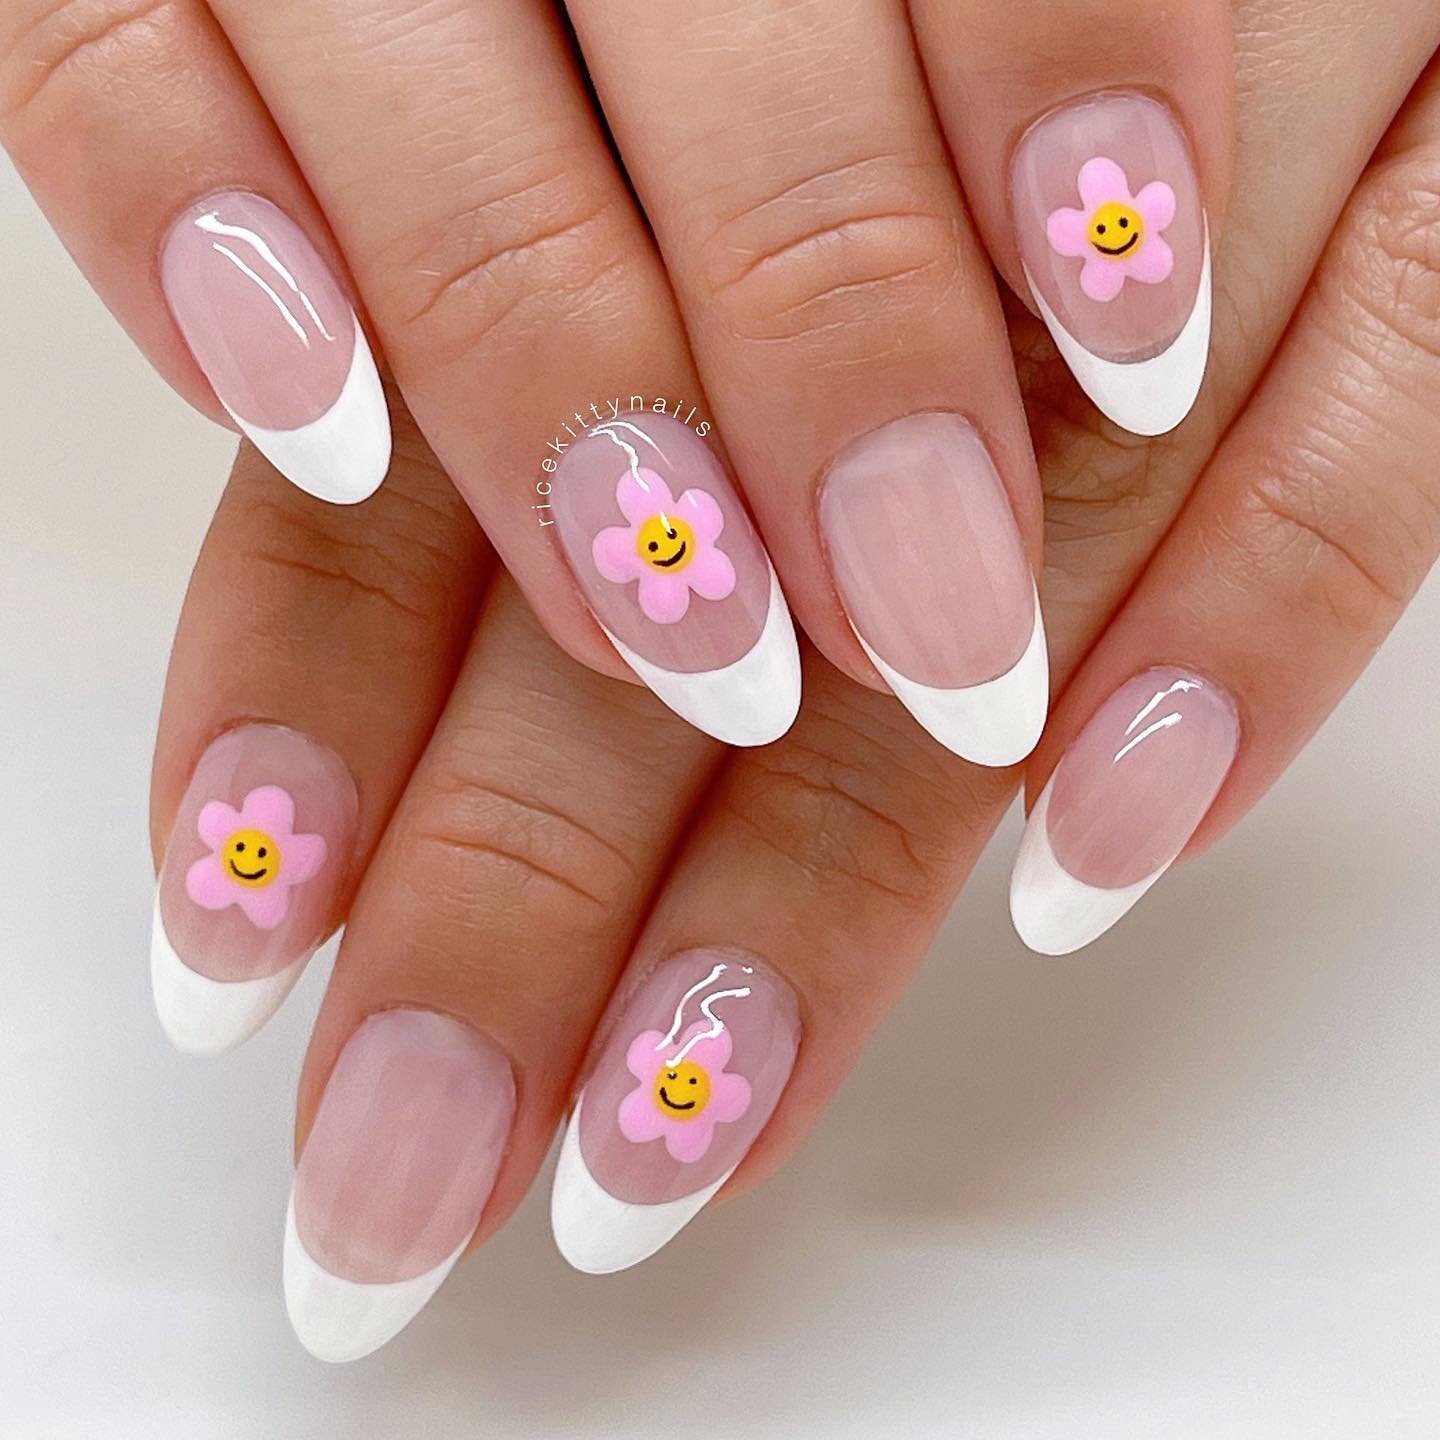 Having a cute daisy nail art and adding a smiley in the middle of each daisy rock! If you want to achieve a cute and cool look, this is definitely for you.